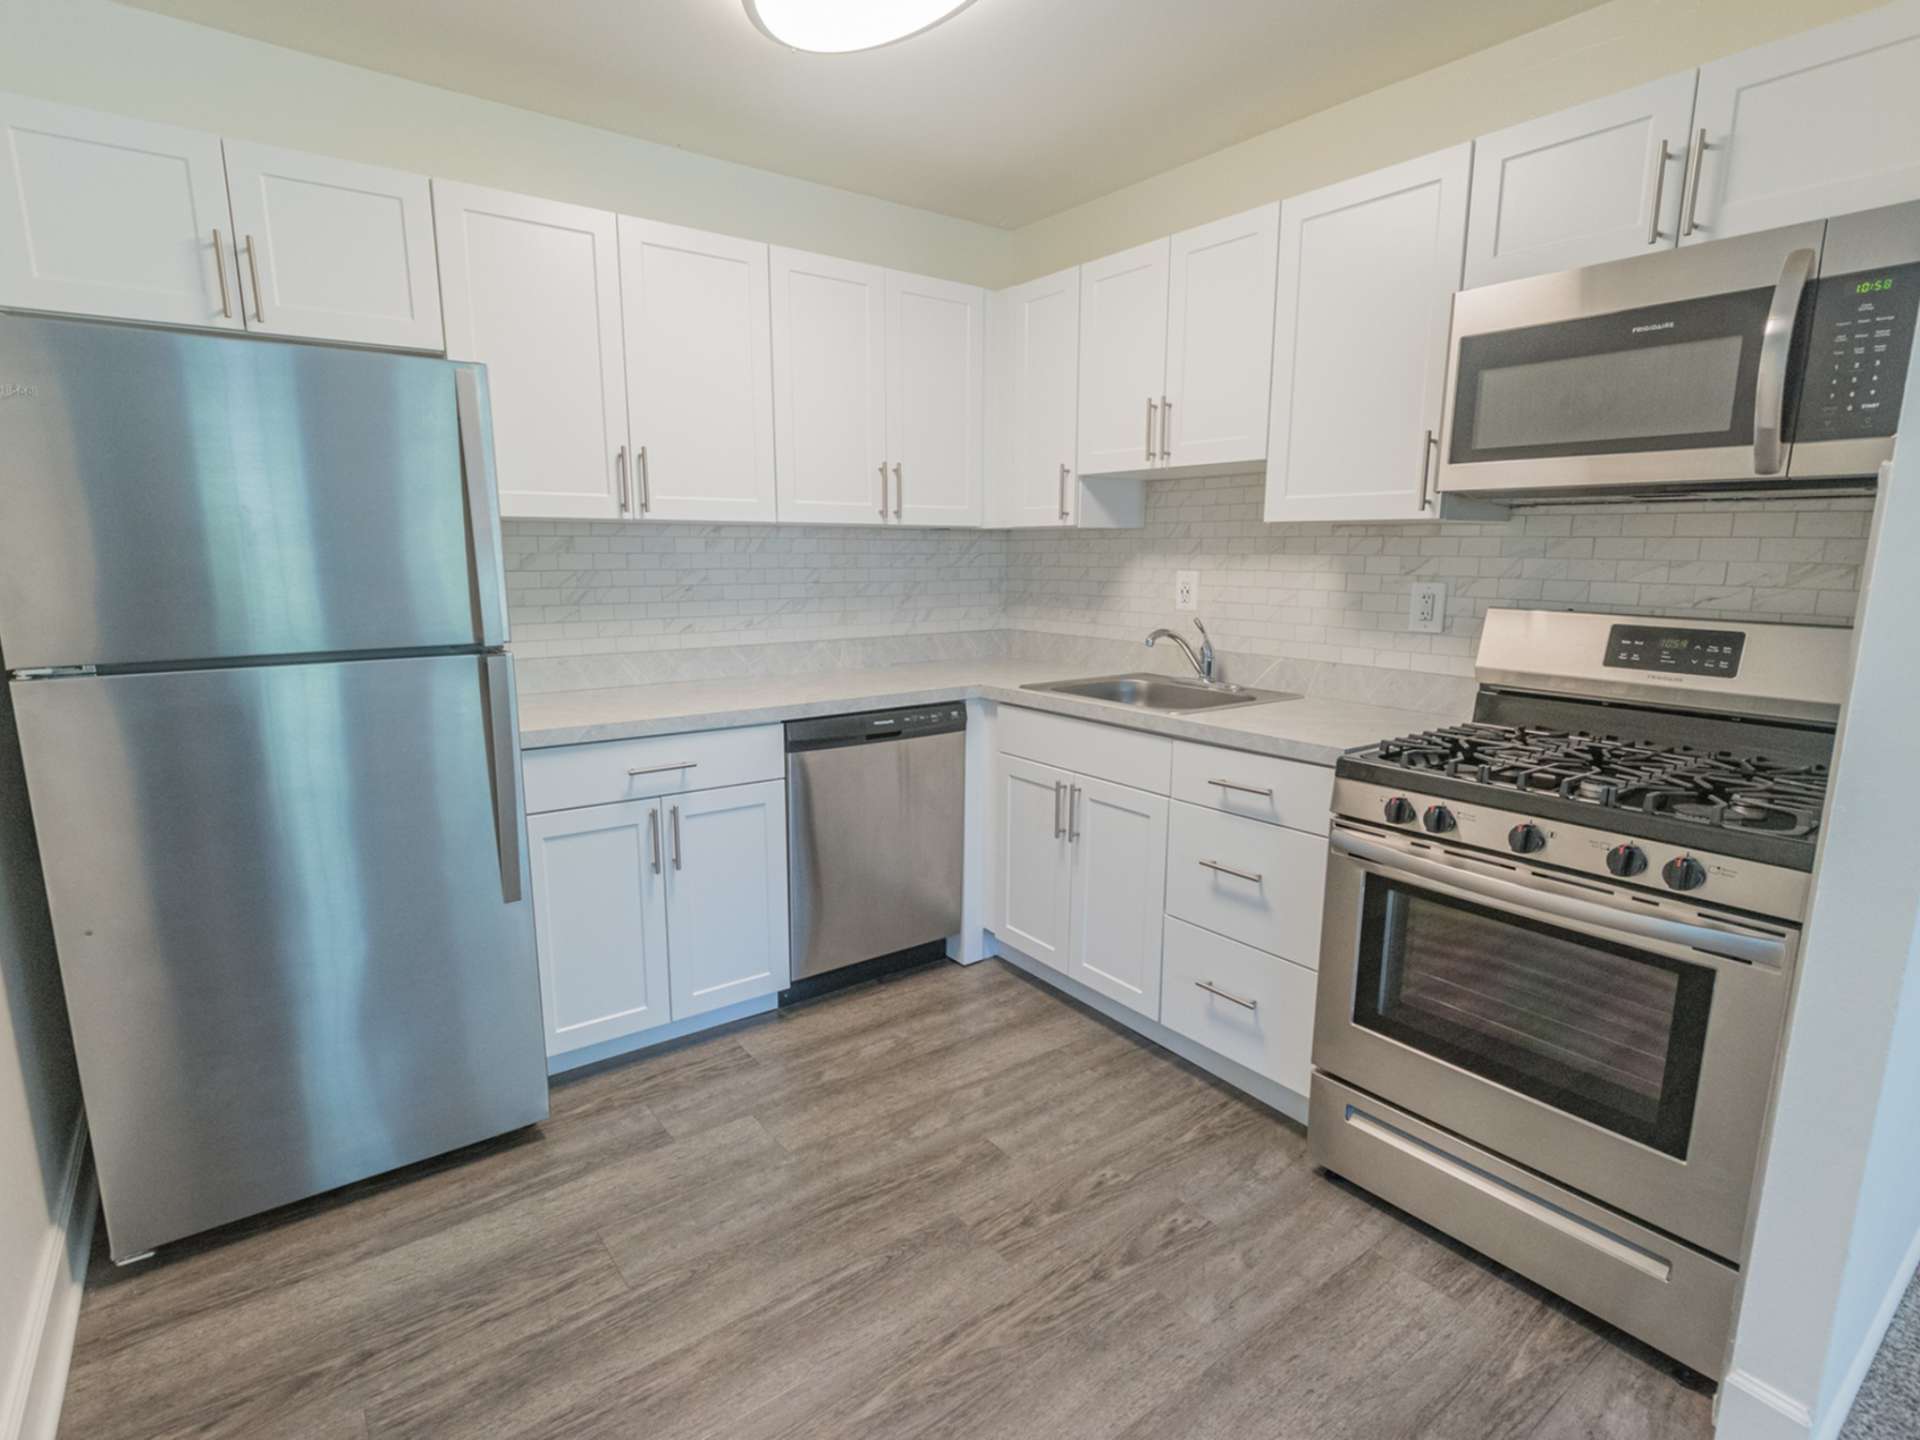 Kitchen with stainless steel appliances, white cabinets, and hardwood-style flooring.